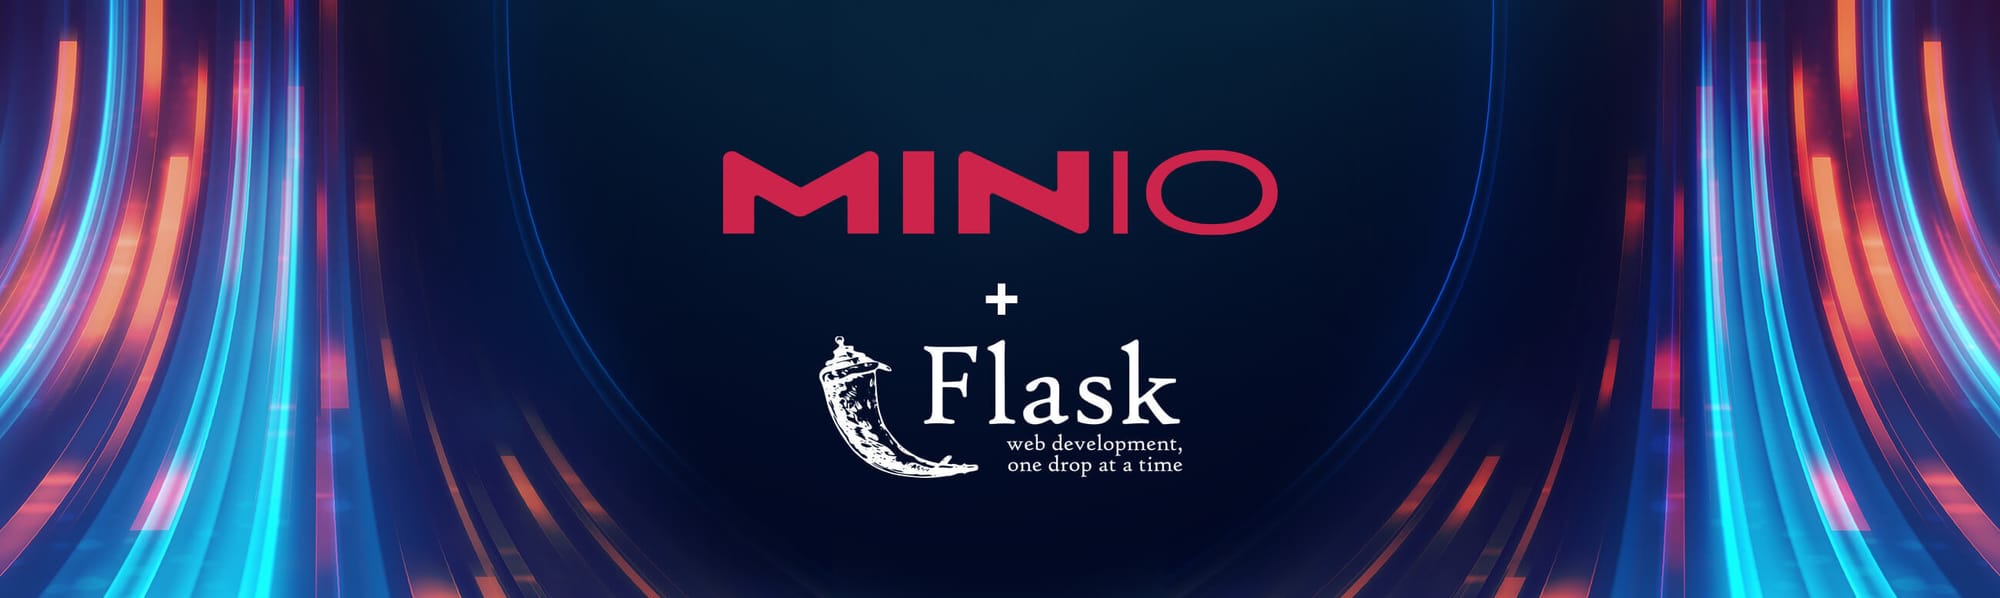 Event-Driven Architecture: MinIO Event Notification Webhooks using Flask